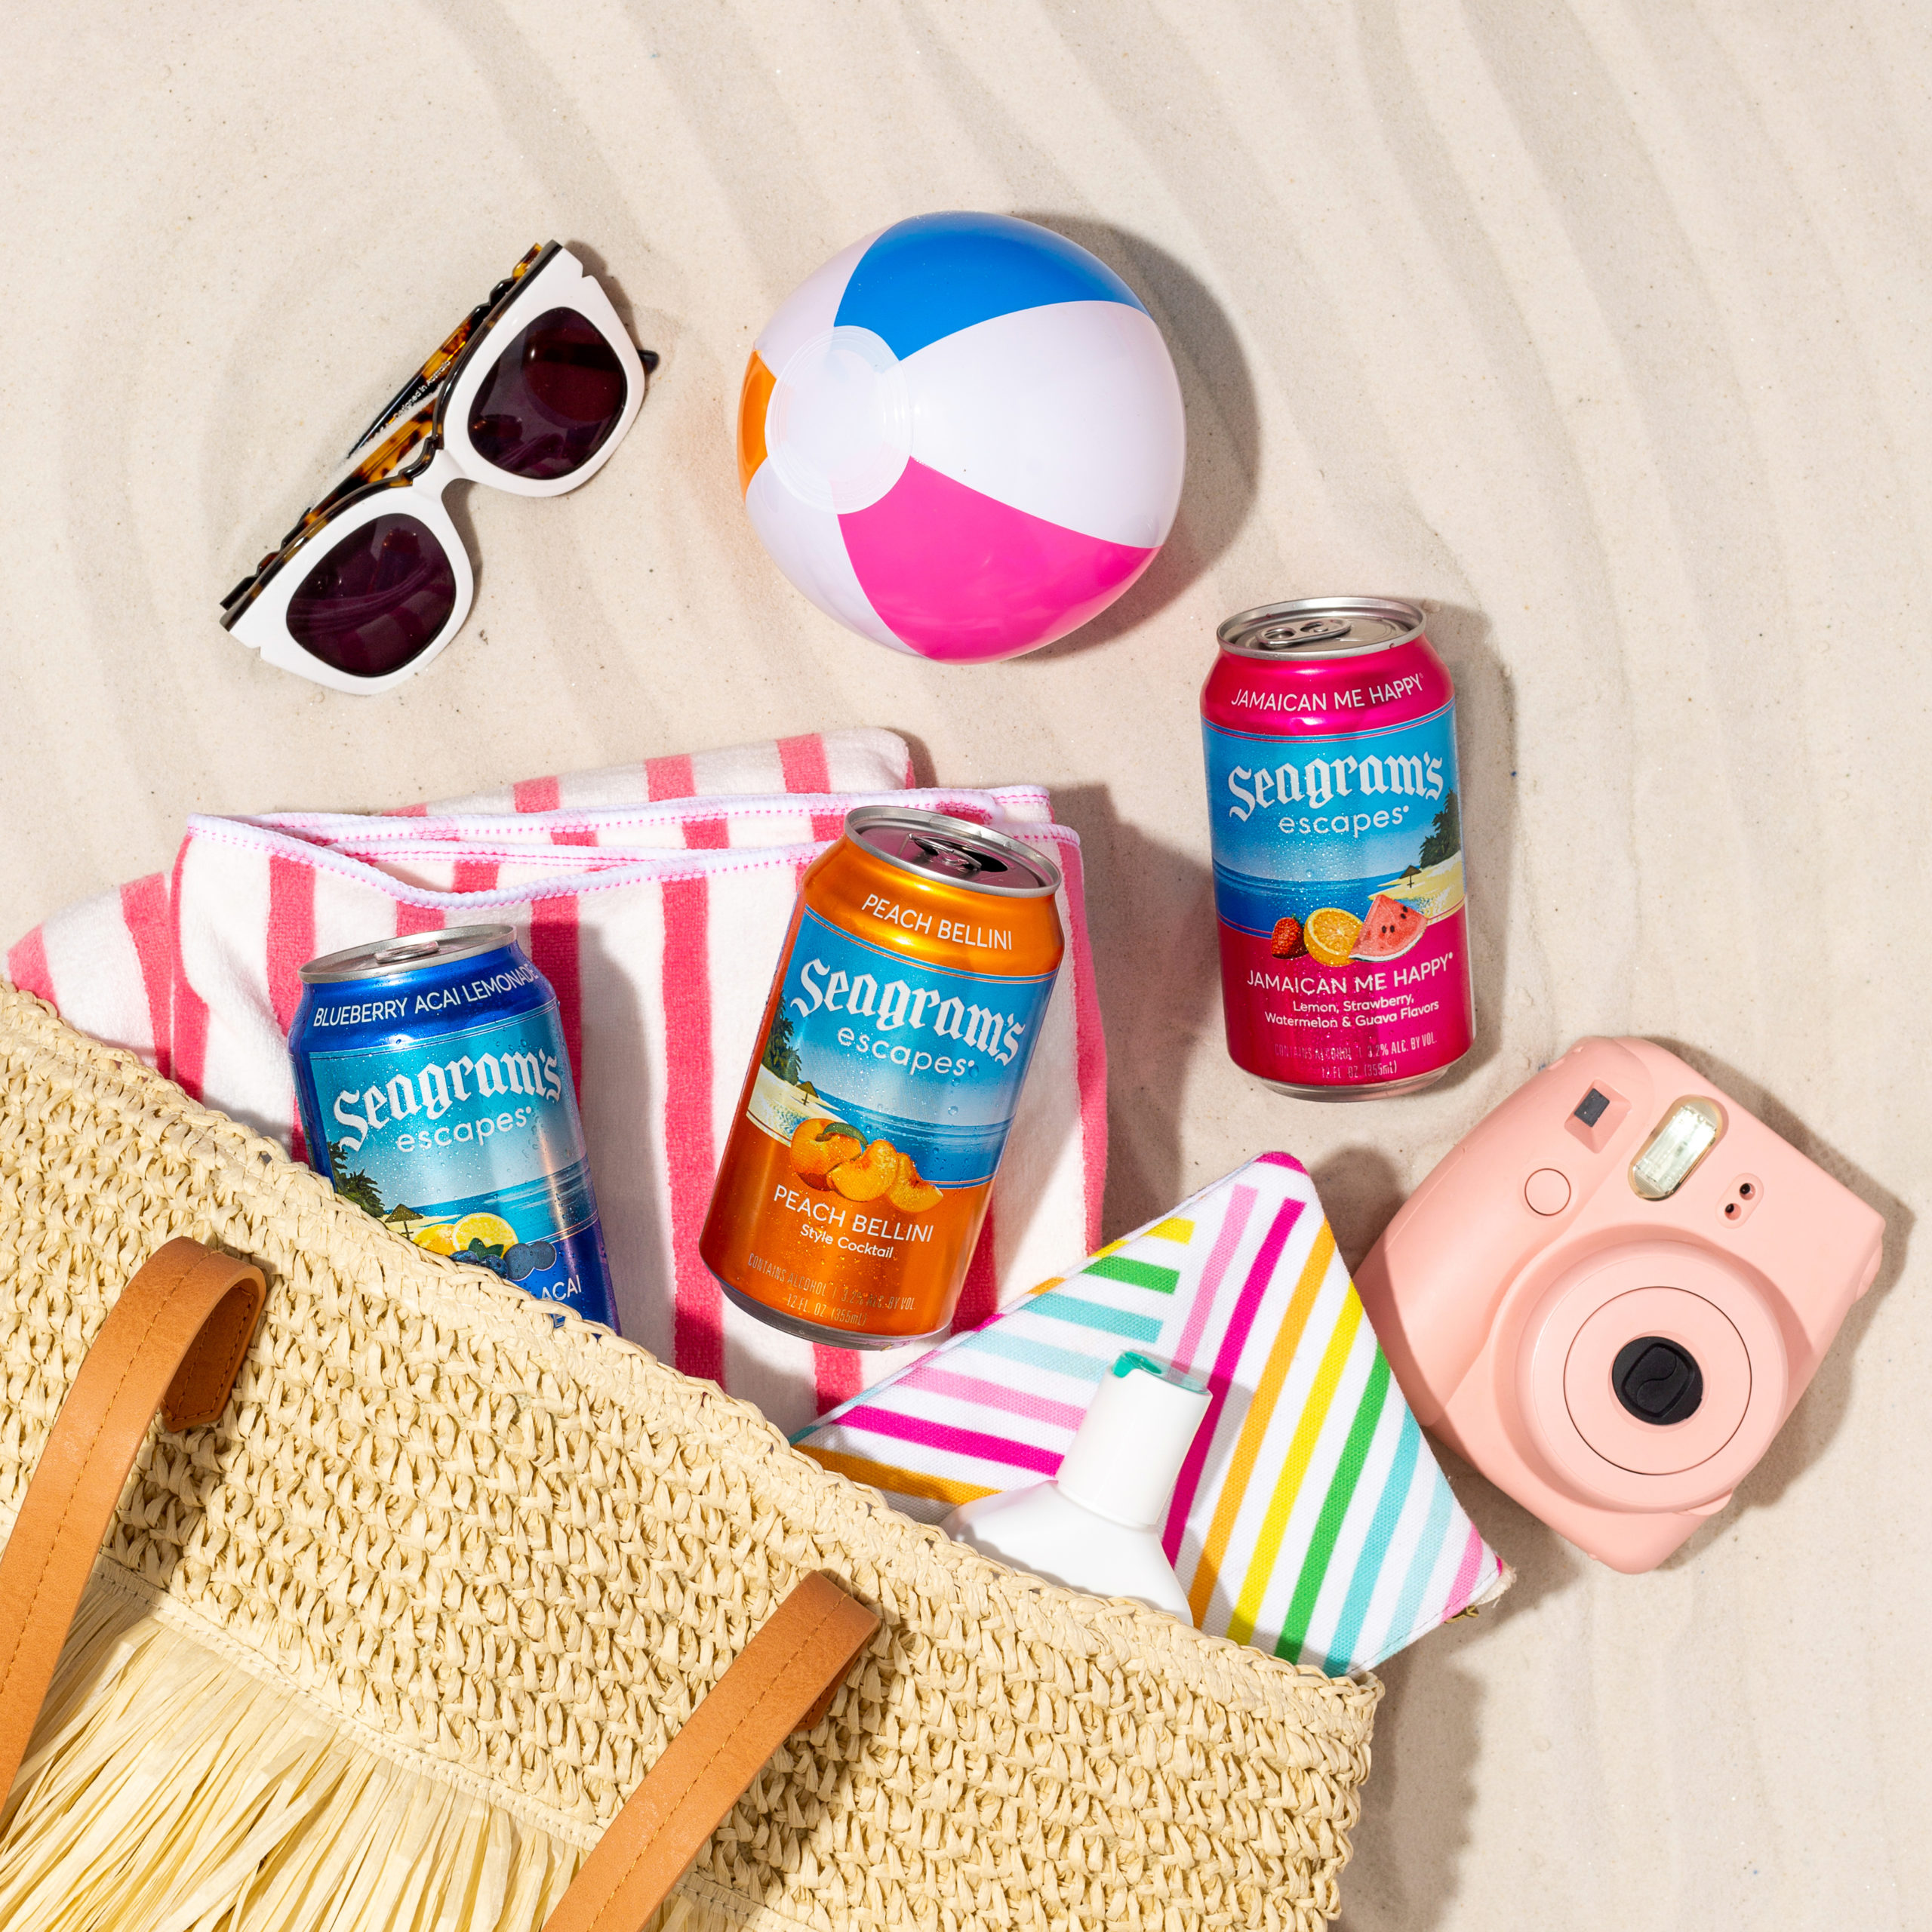 Sunslayer: Bold Product Photos For A Sunscreen Brand, 40% OFF